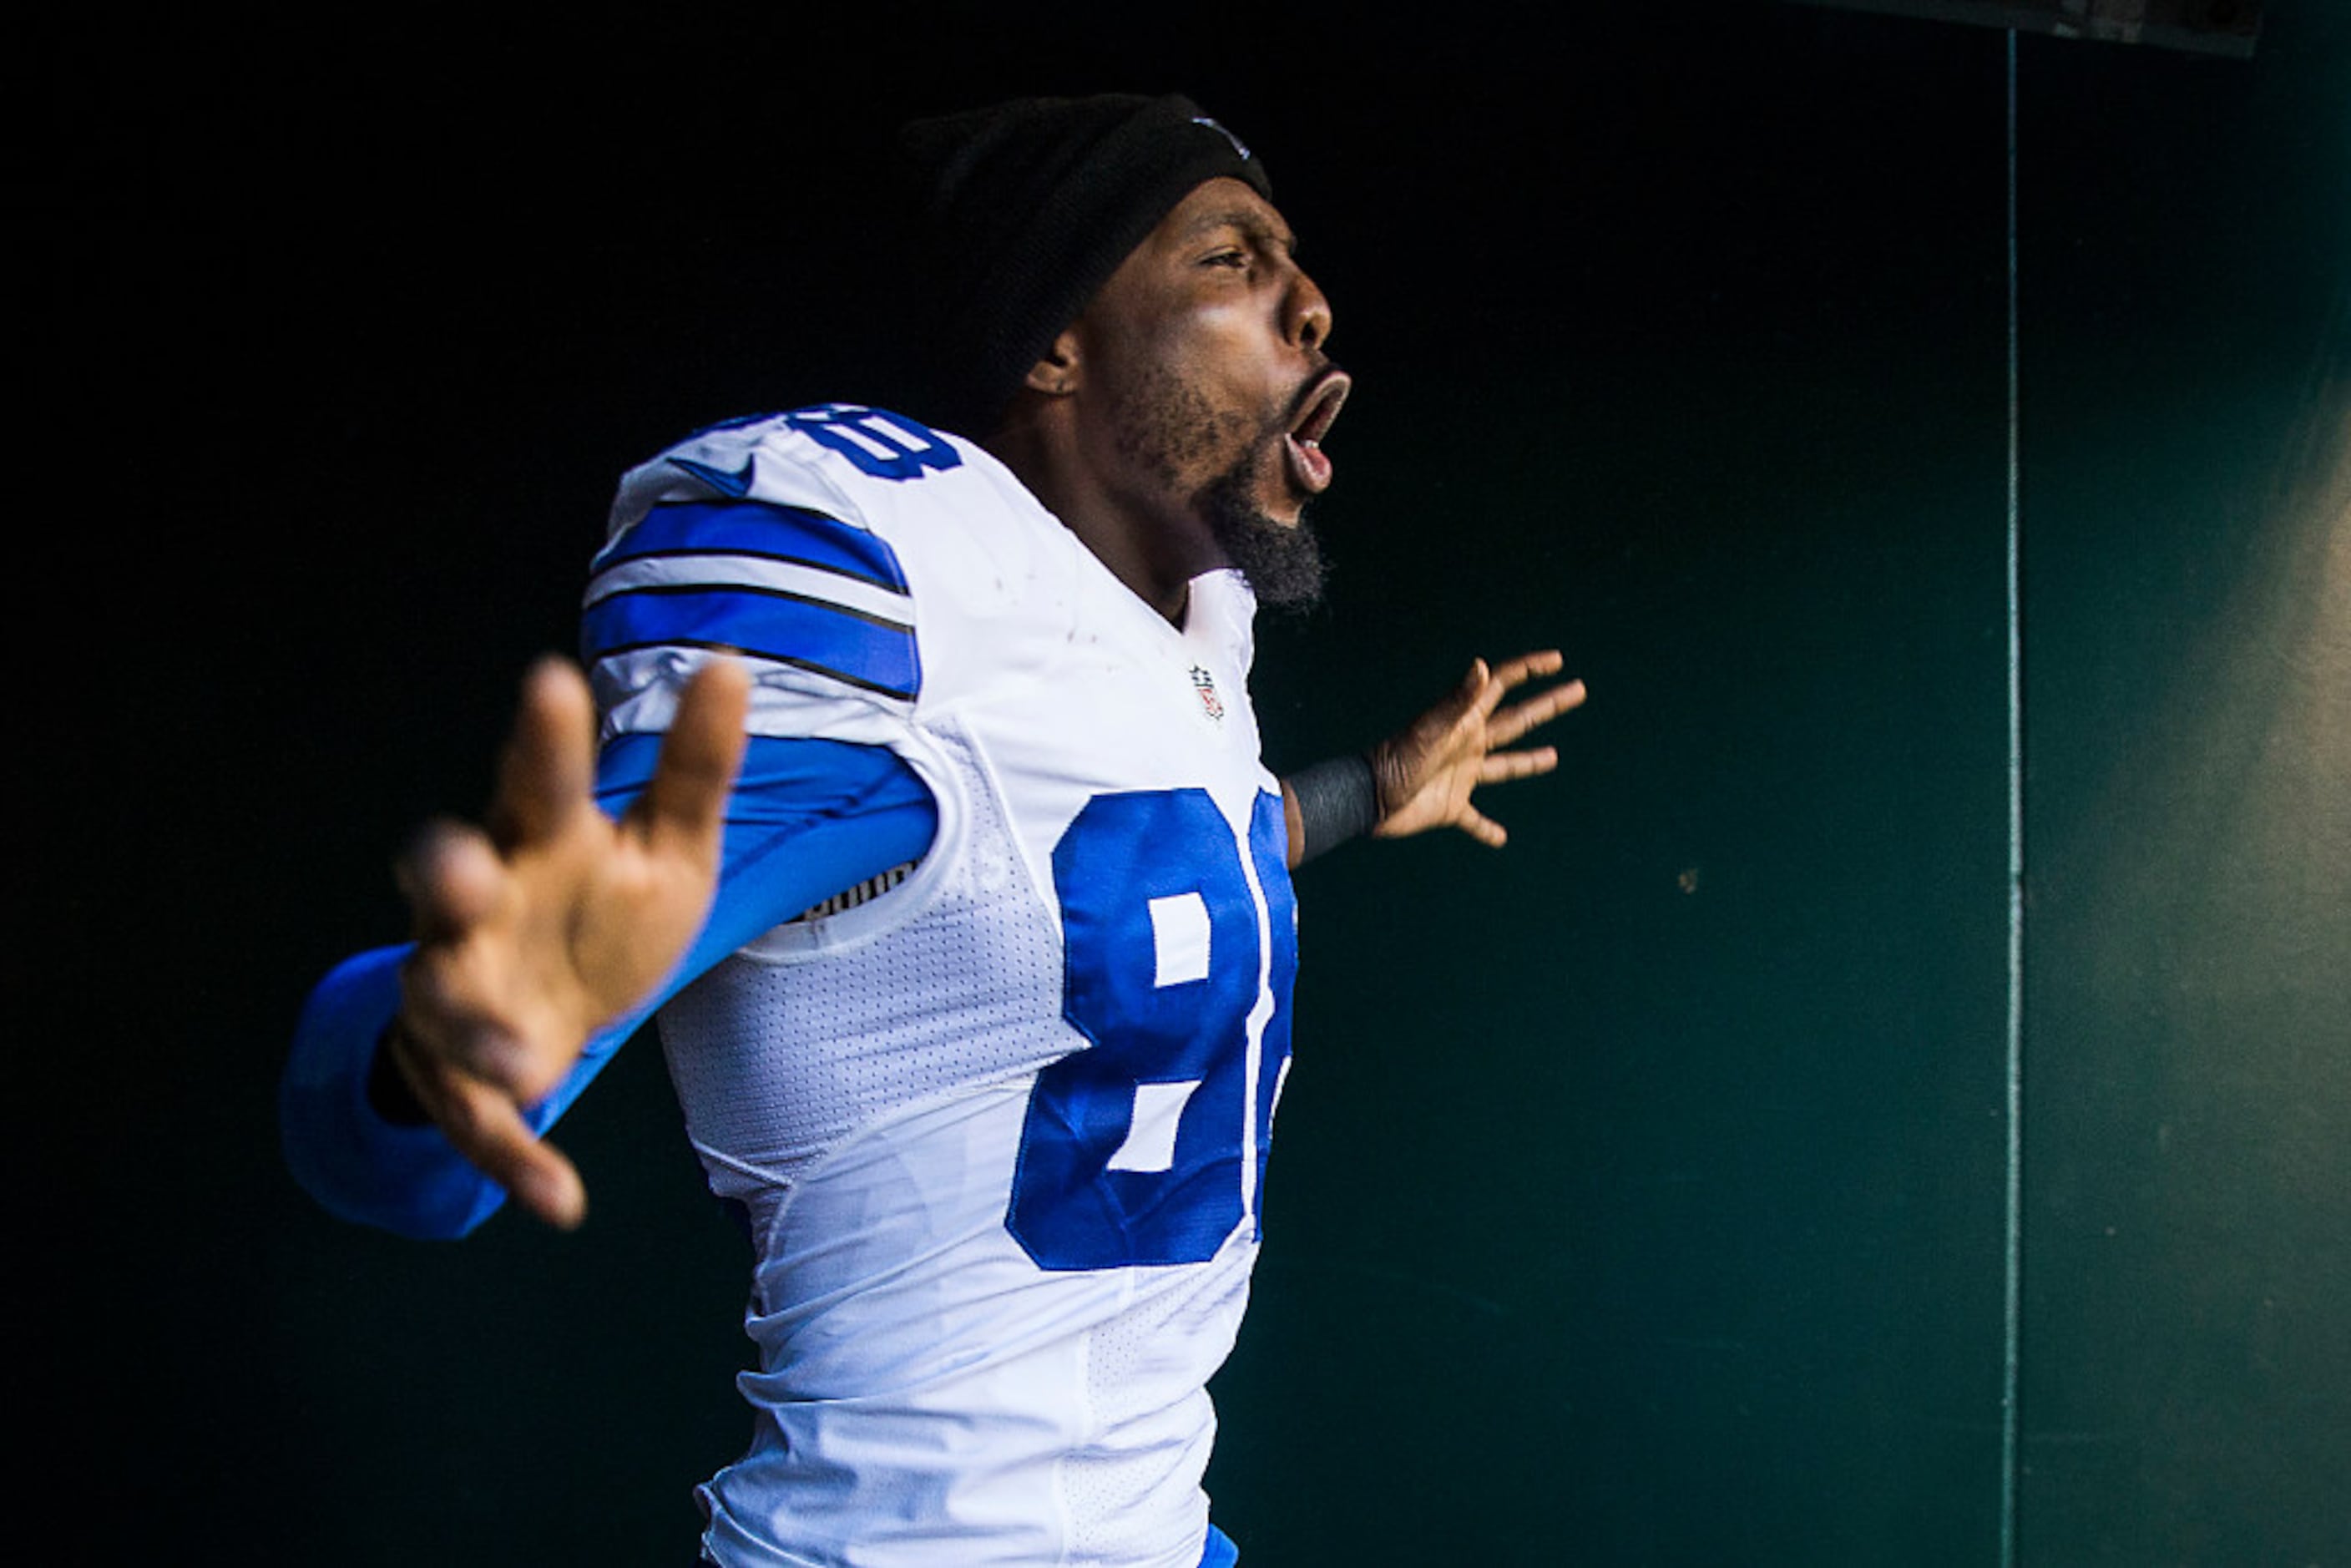 Dez Bryant's barbecue for his hometown of Lufkin looked pretty epic